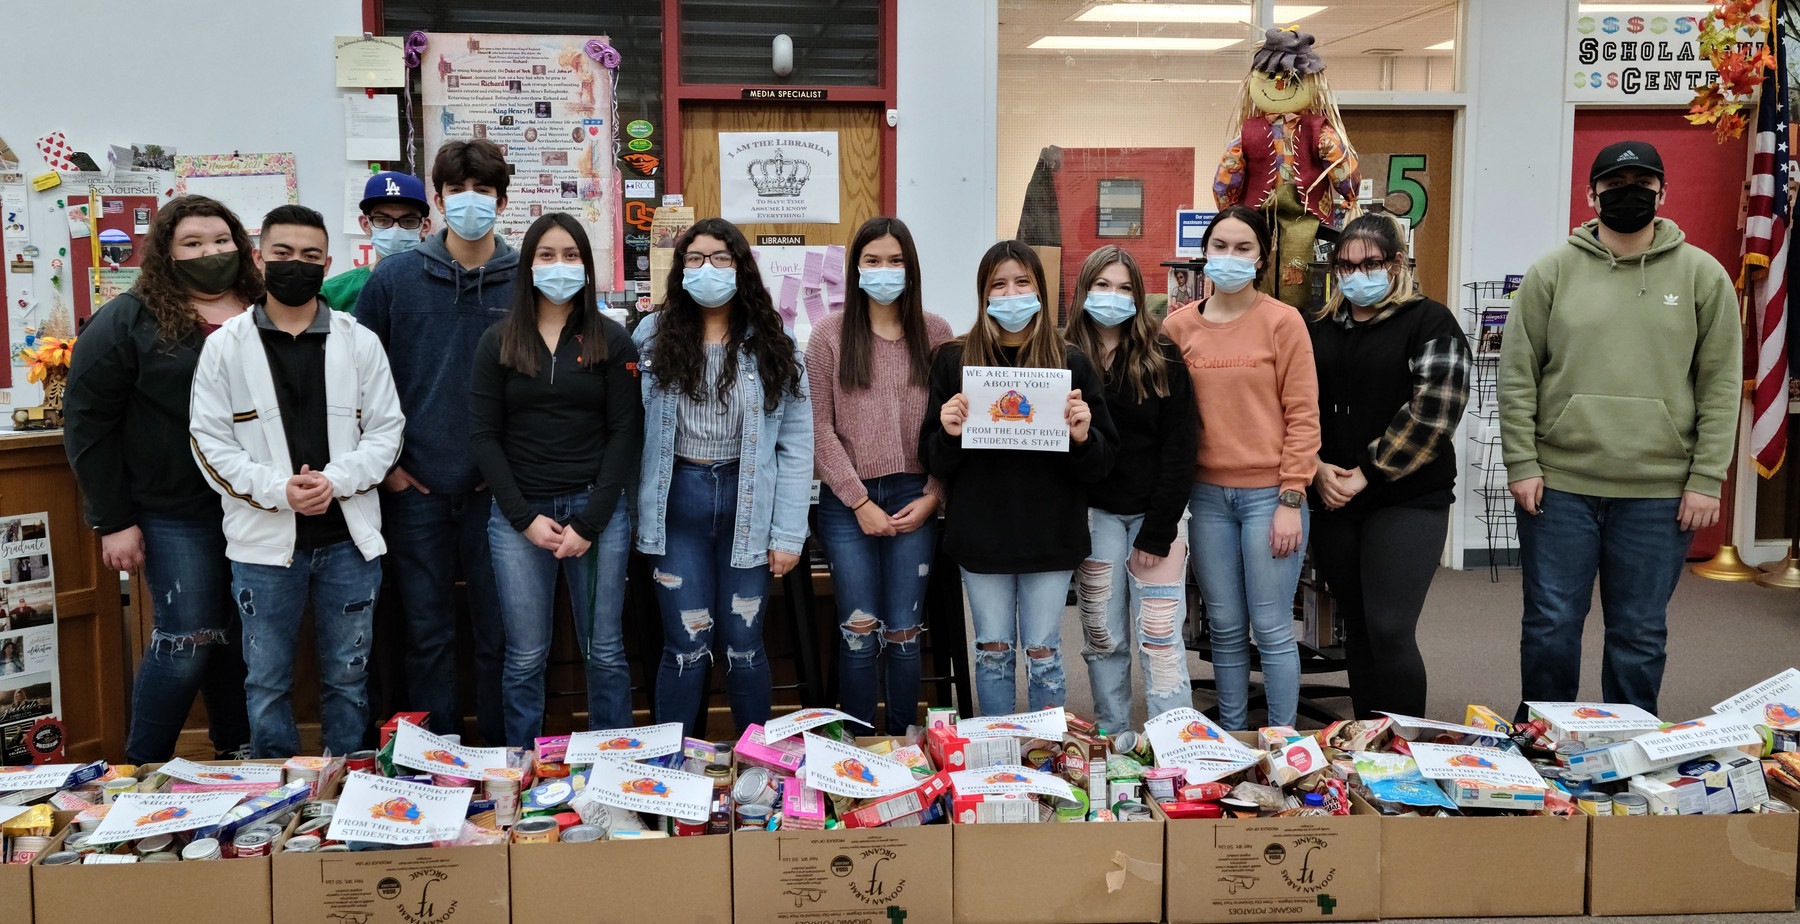 Lost River Junior/Senior High School leadership students organize food for Thanksgiving boxes for area families. The school has been hosting a food drive and providing food boxes to families for more than 35 years.